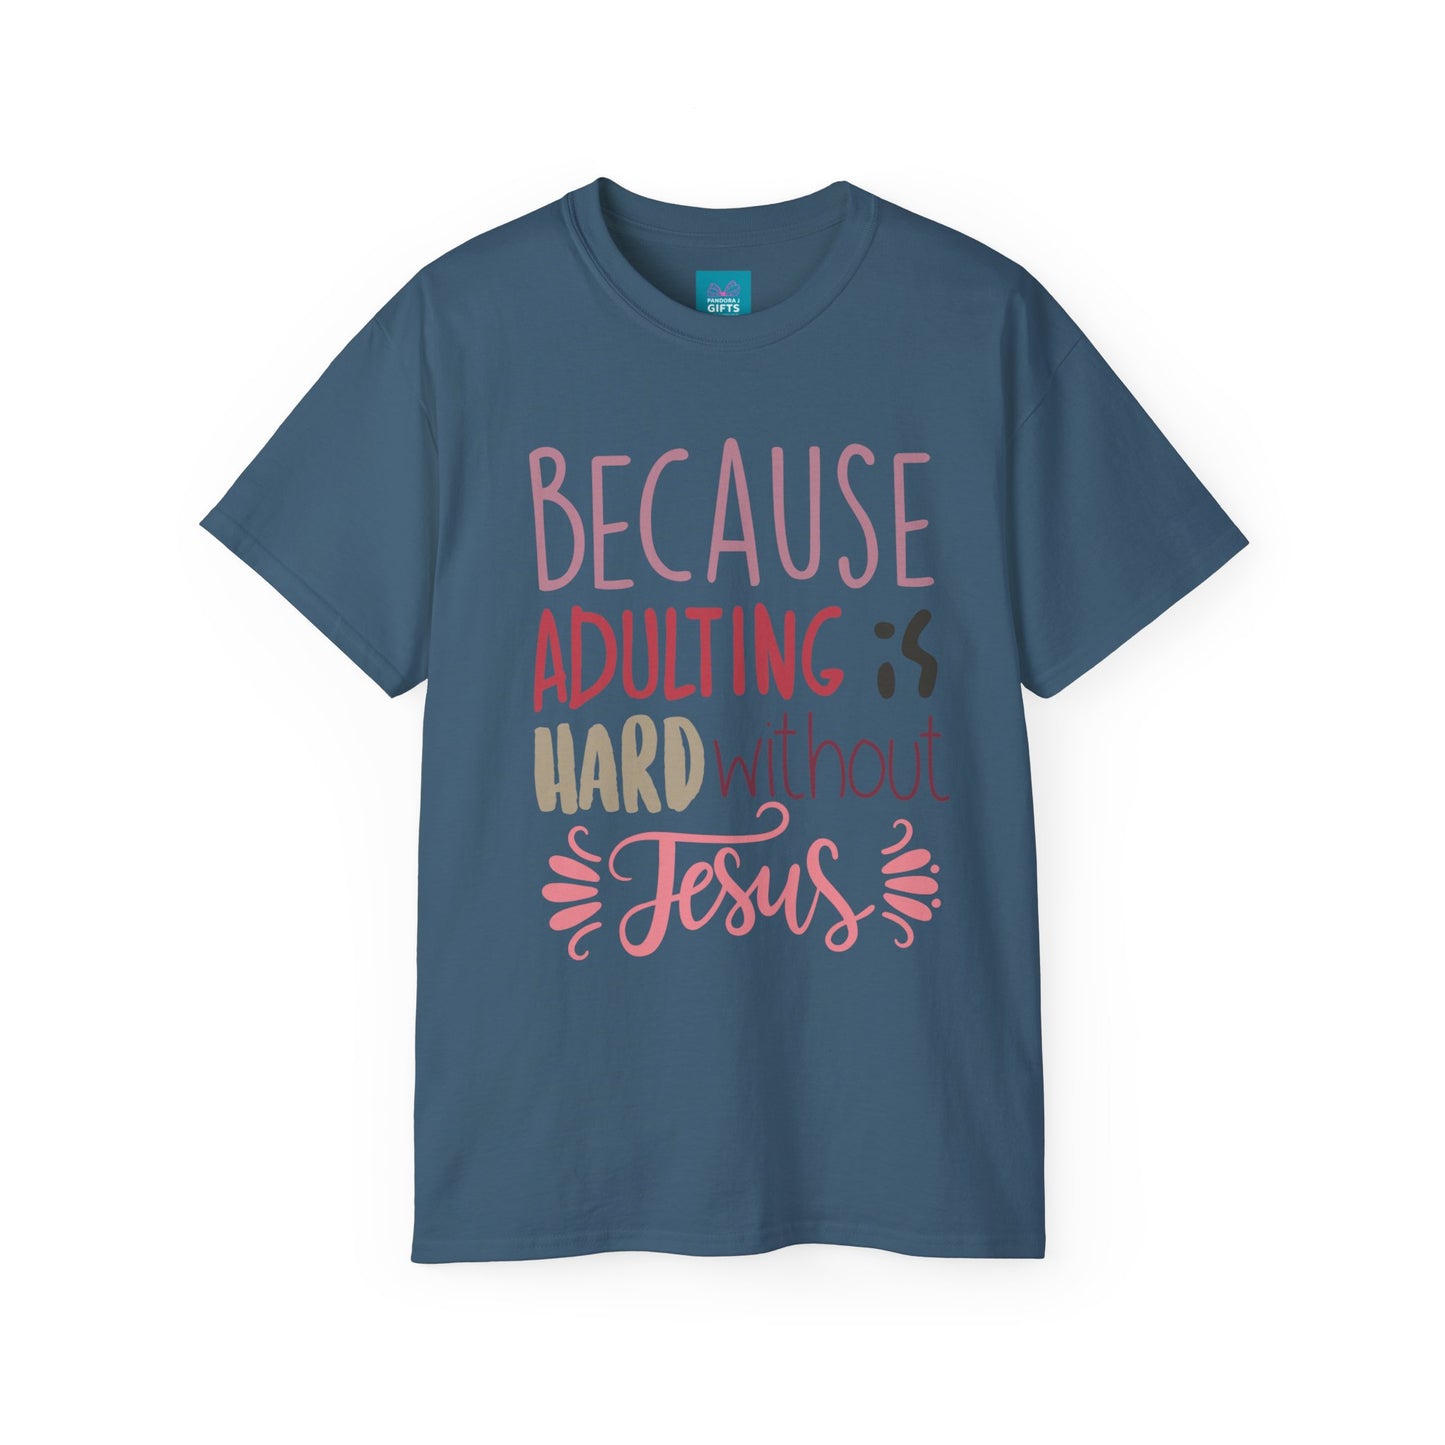 Navy blue shirt with words "Because Adulting is Hard without Jesus"